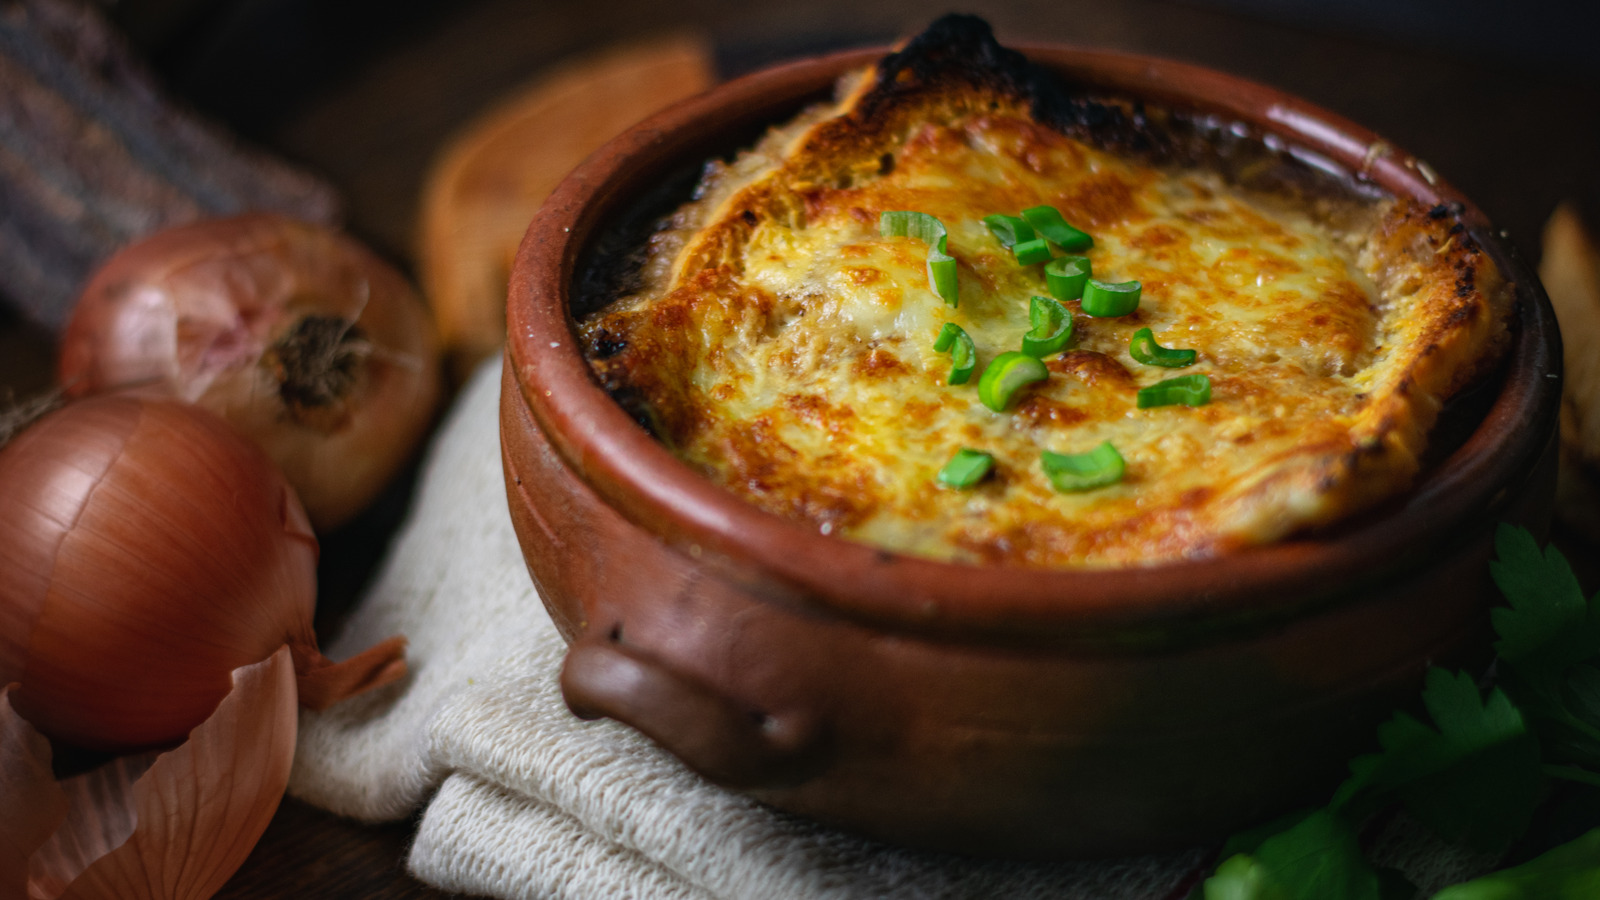 Do You Have To Use Gruyère Cheese For French Onion Soup?